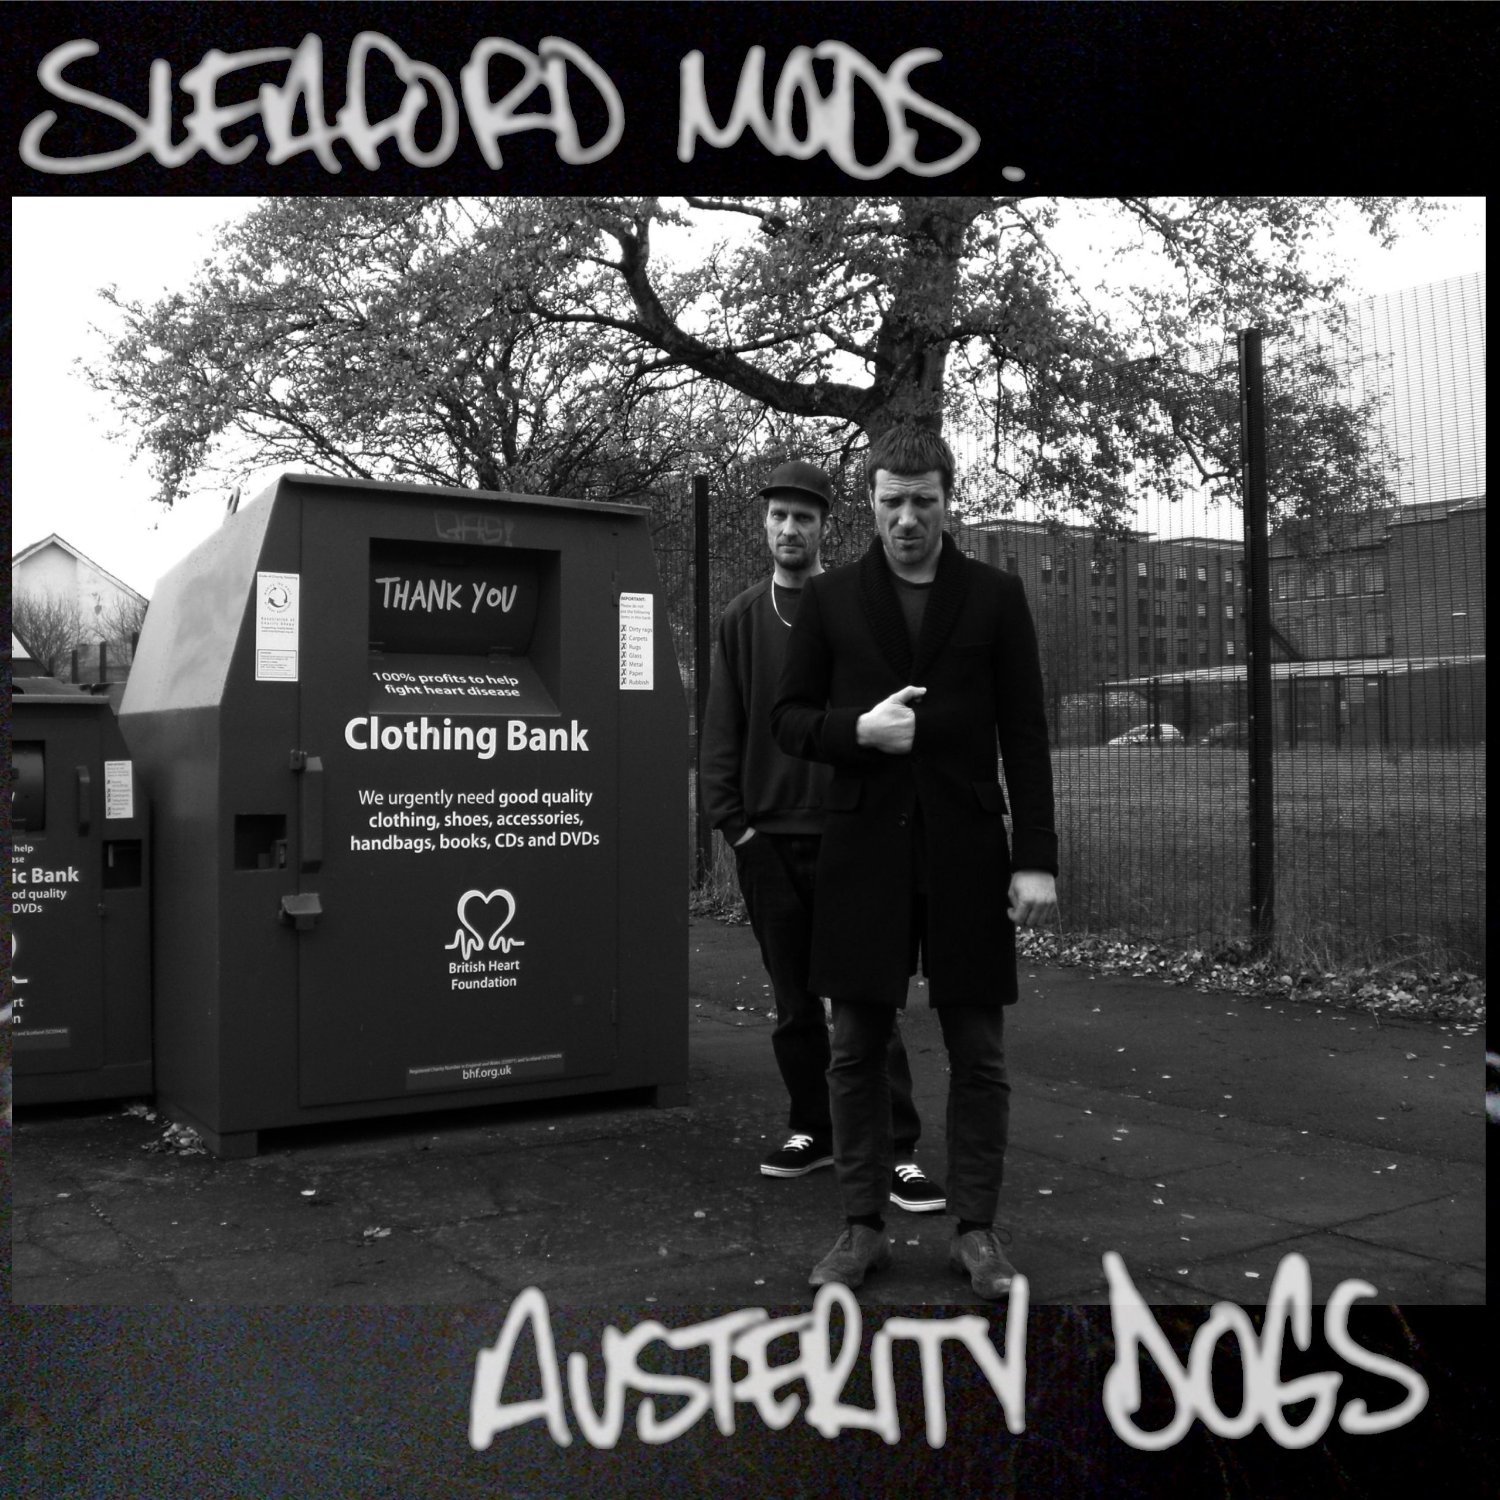 Sleaford Mods "Austerity Dogs" LP